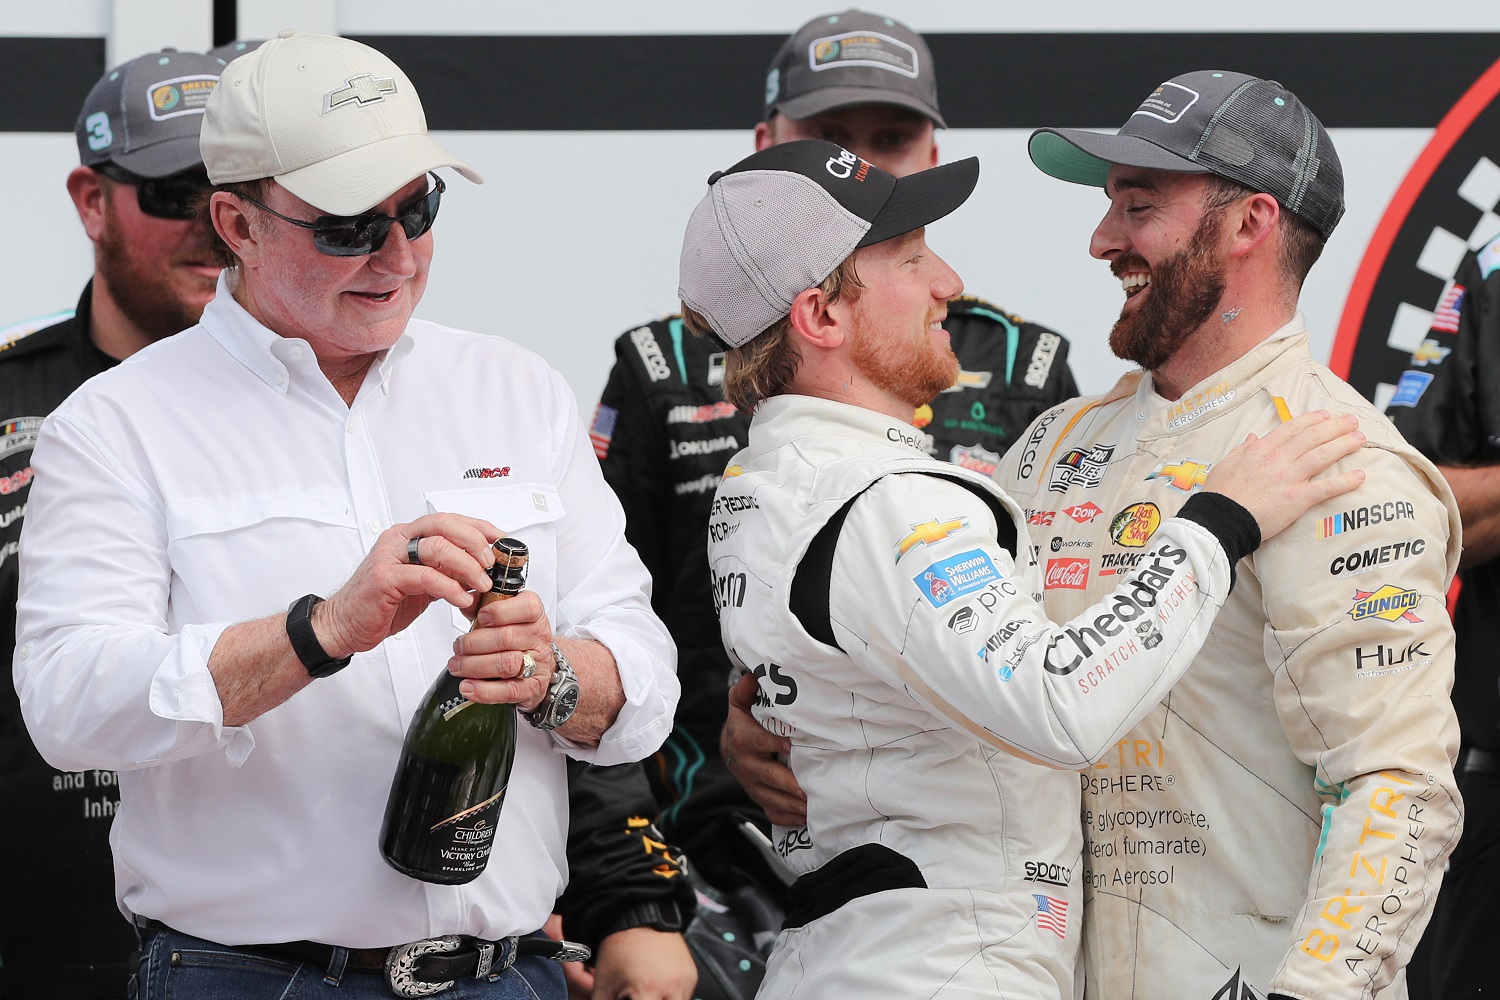 Austin Dillon is congratulated by Tyler Reddick as team owner Richard Childress looks on after the NASCAR Cup Series Coke Zero Sugar 400 at Daytona International Speedway on Aug. 28, 2022.